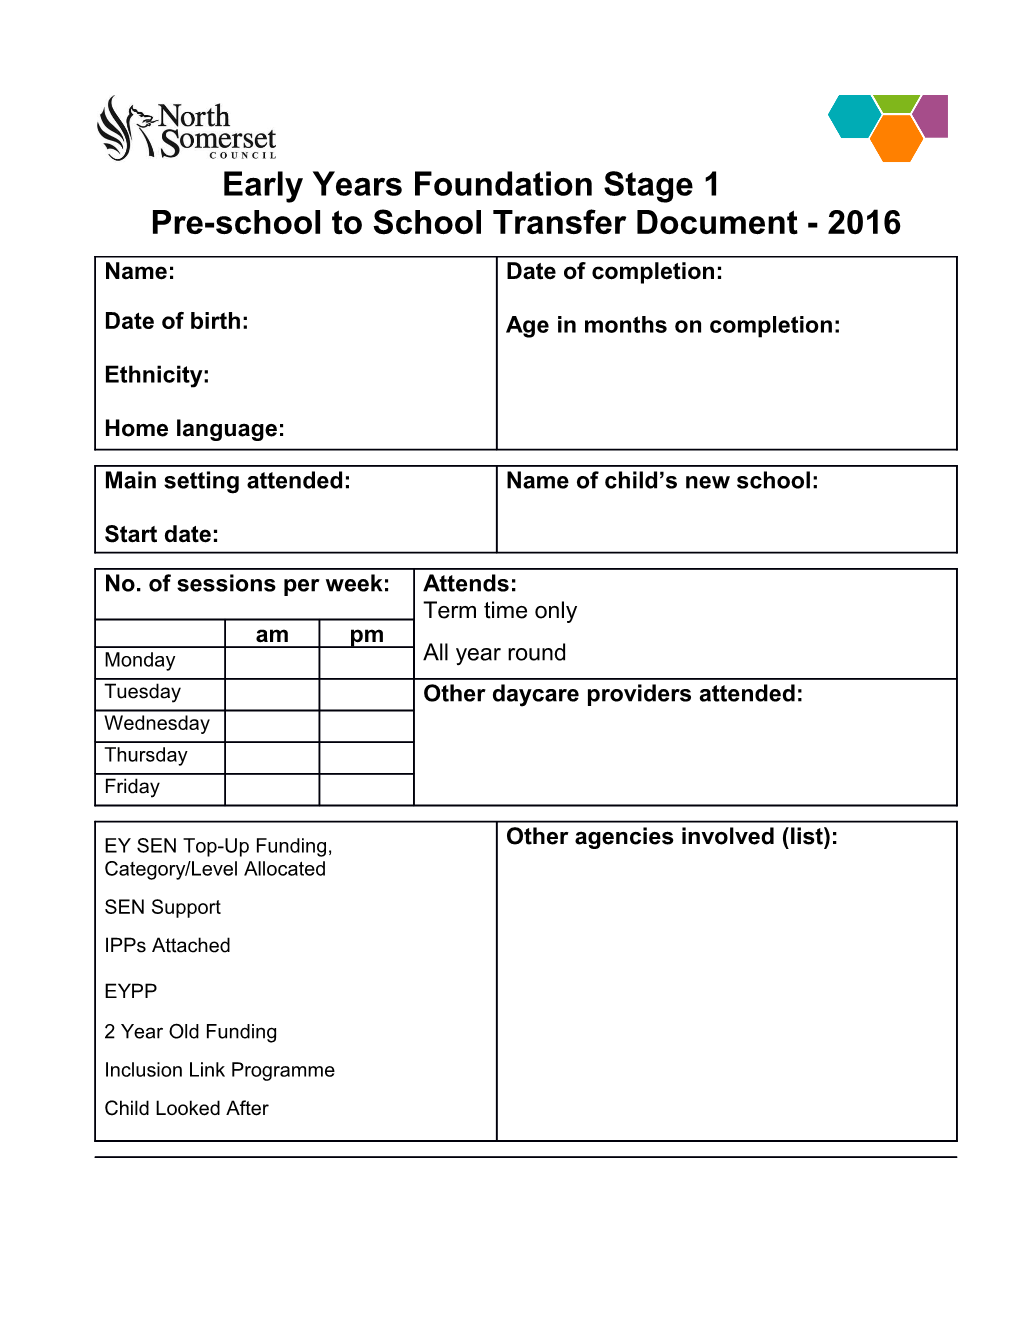 Early Years Foundation Stage 1